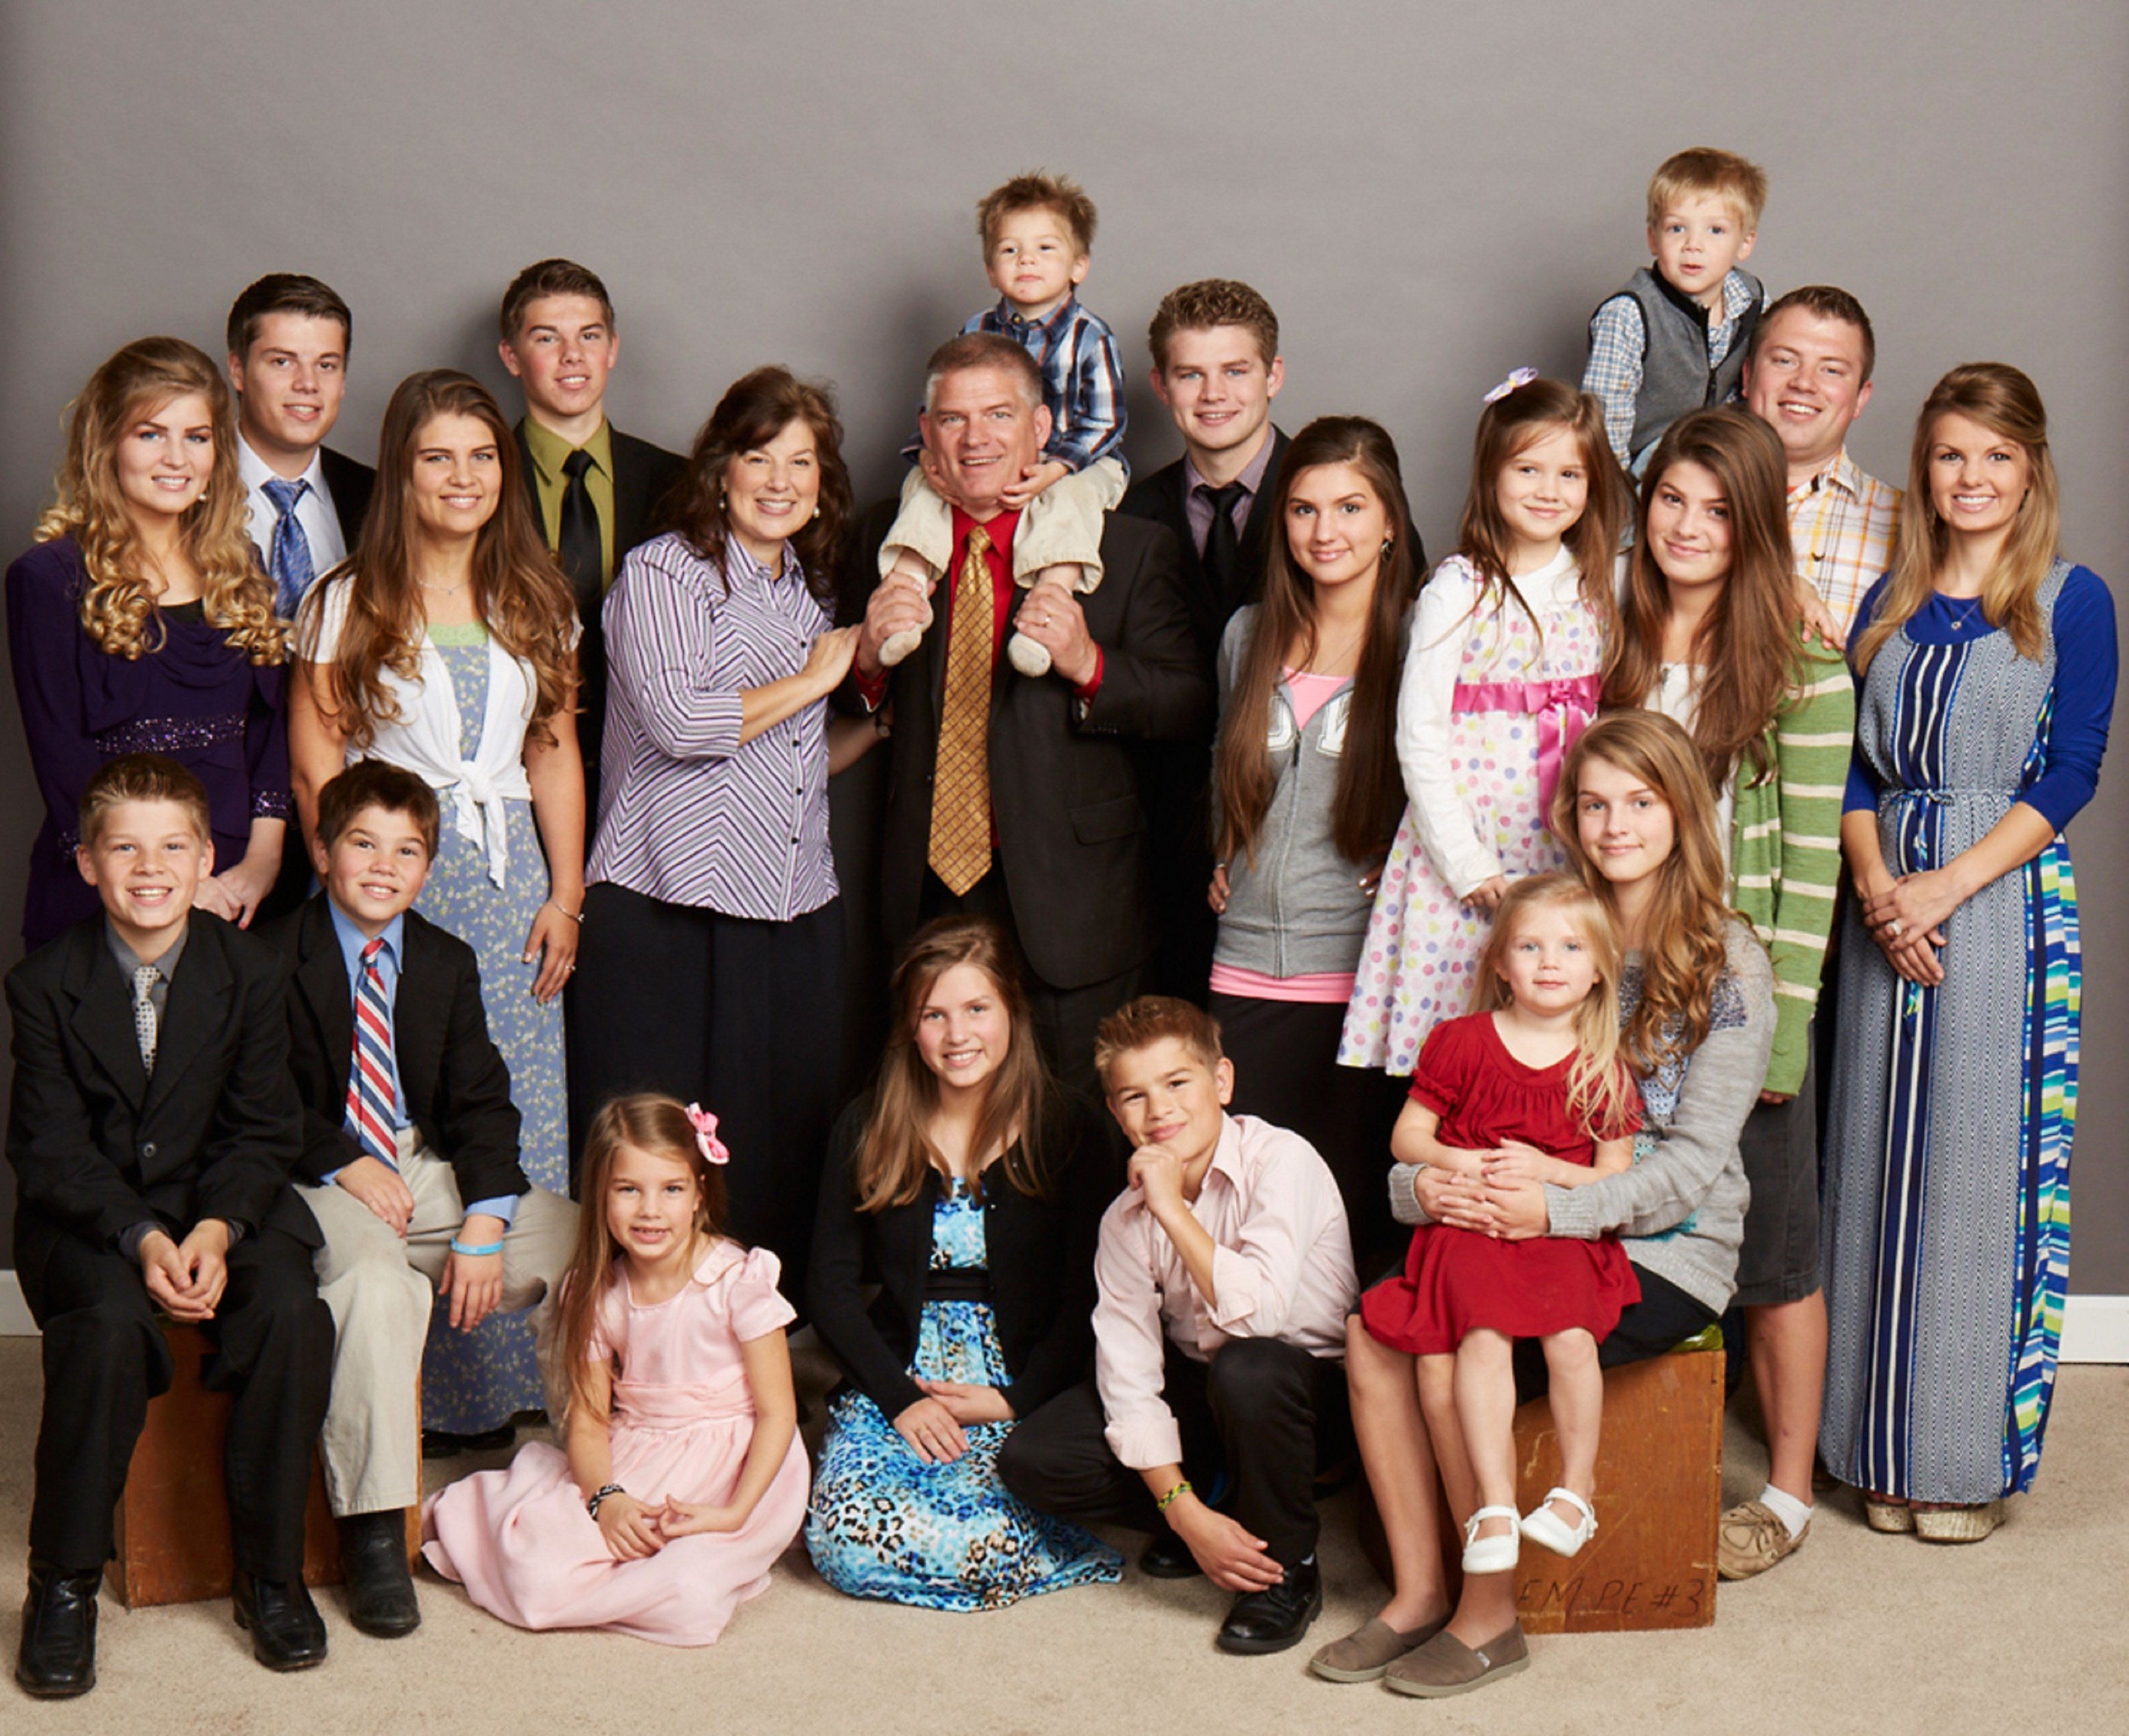 The Bates family poses for promotional photos for their UpTV series, 'Bringing Up Bates'